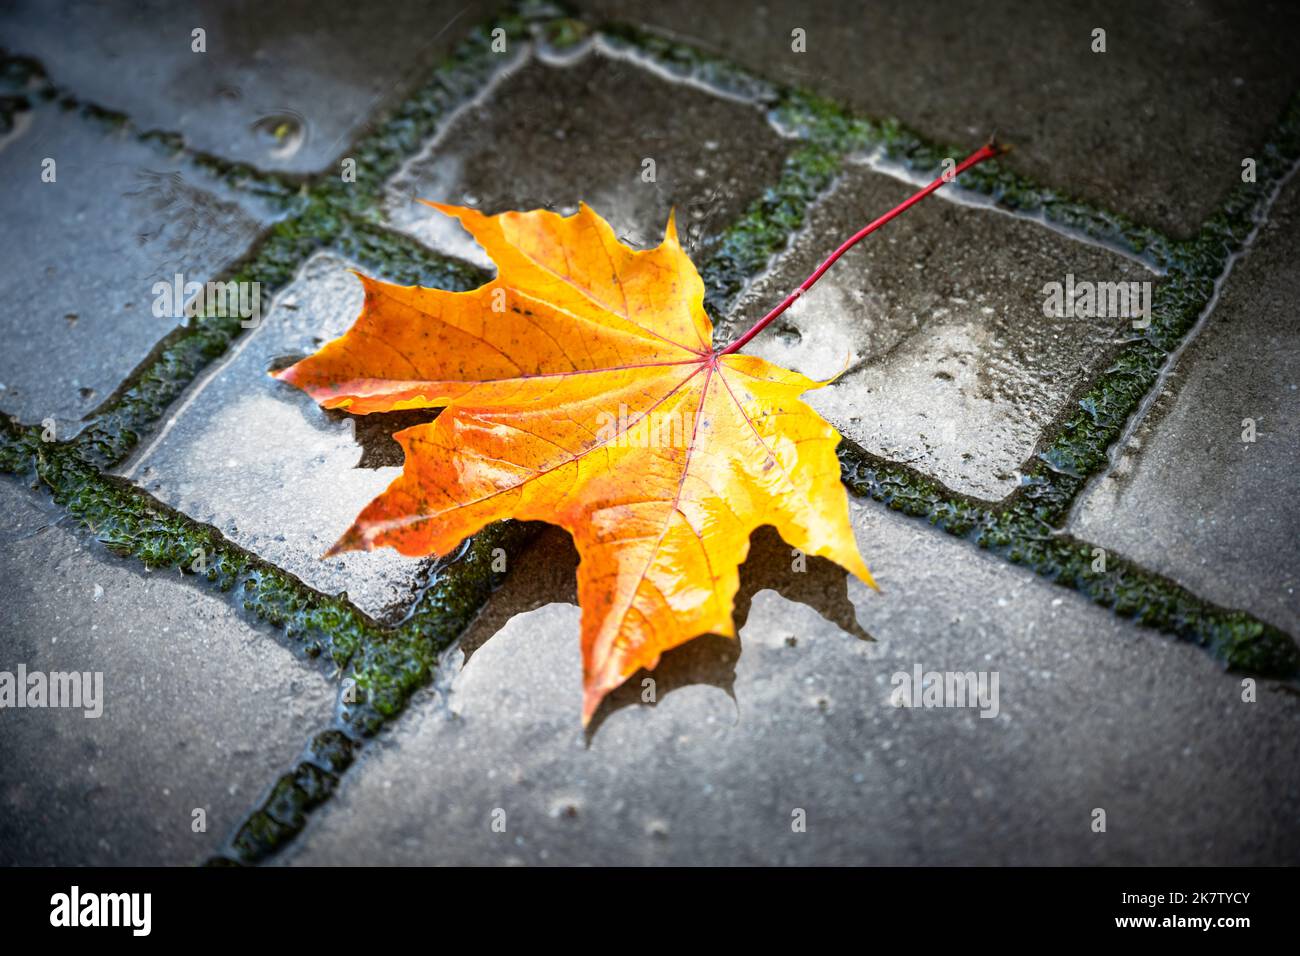 Orange autumn maple leaf over wet paving stones background with copy space. Fall season concept Stock Photo